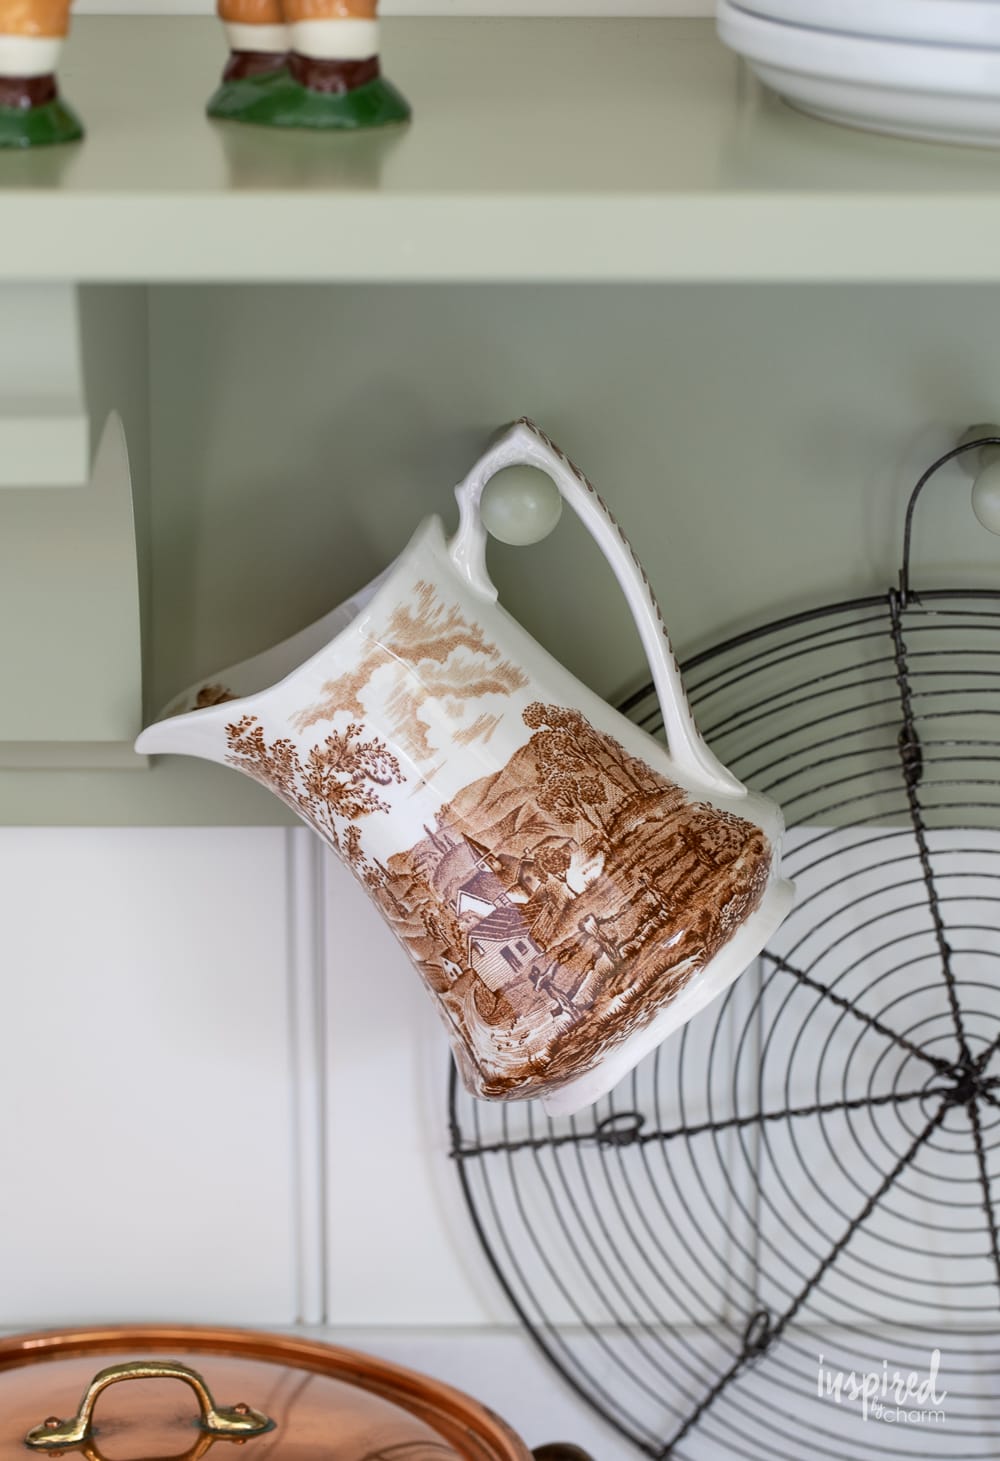 transferware pitcher hanging on a peg rail in a kitchen.